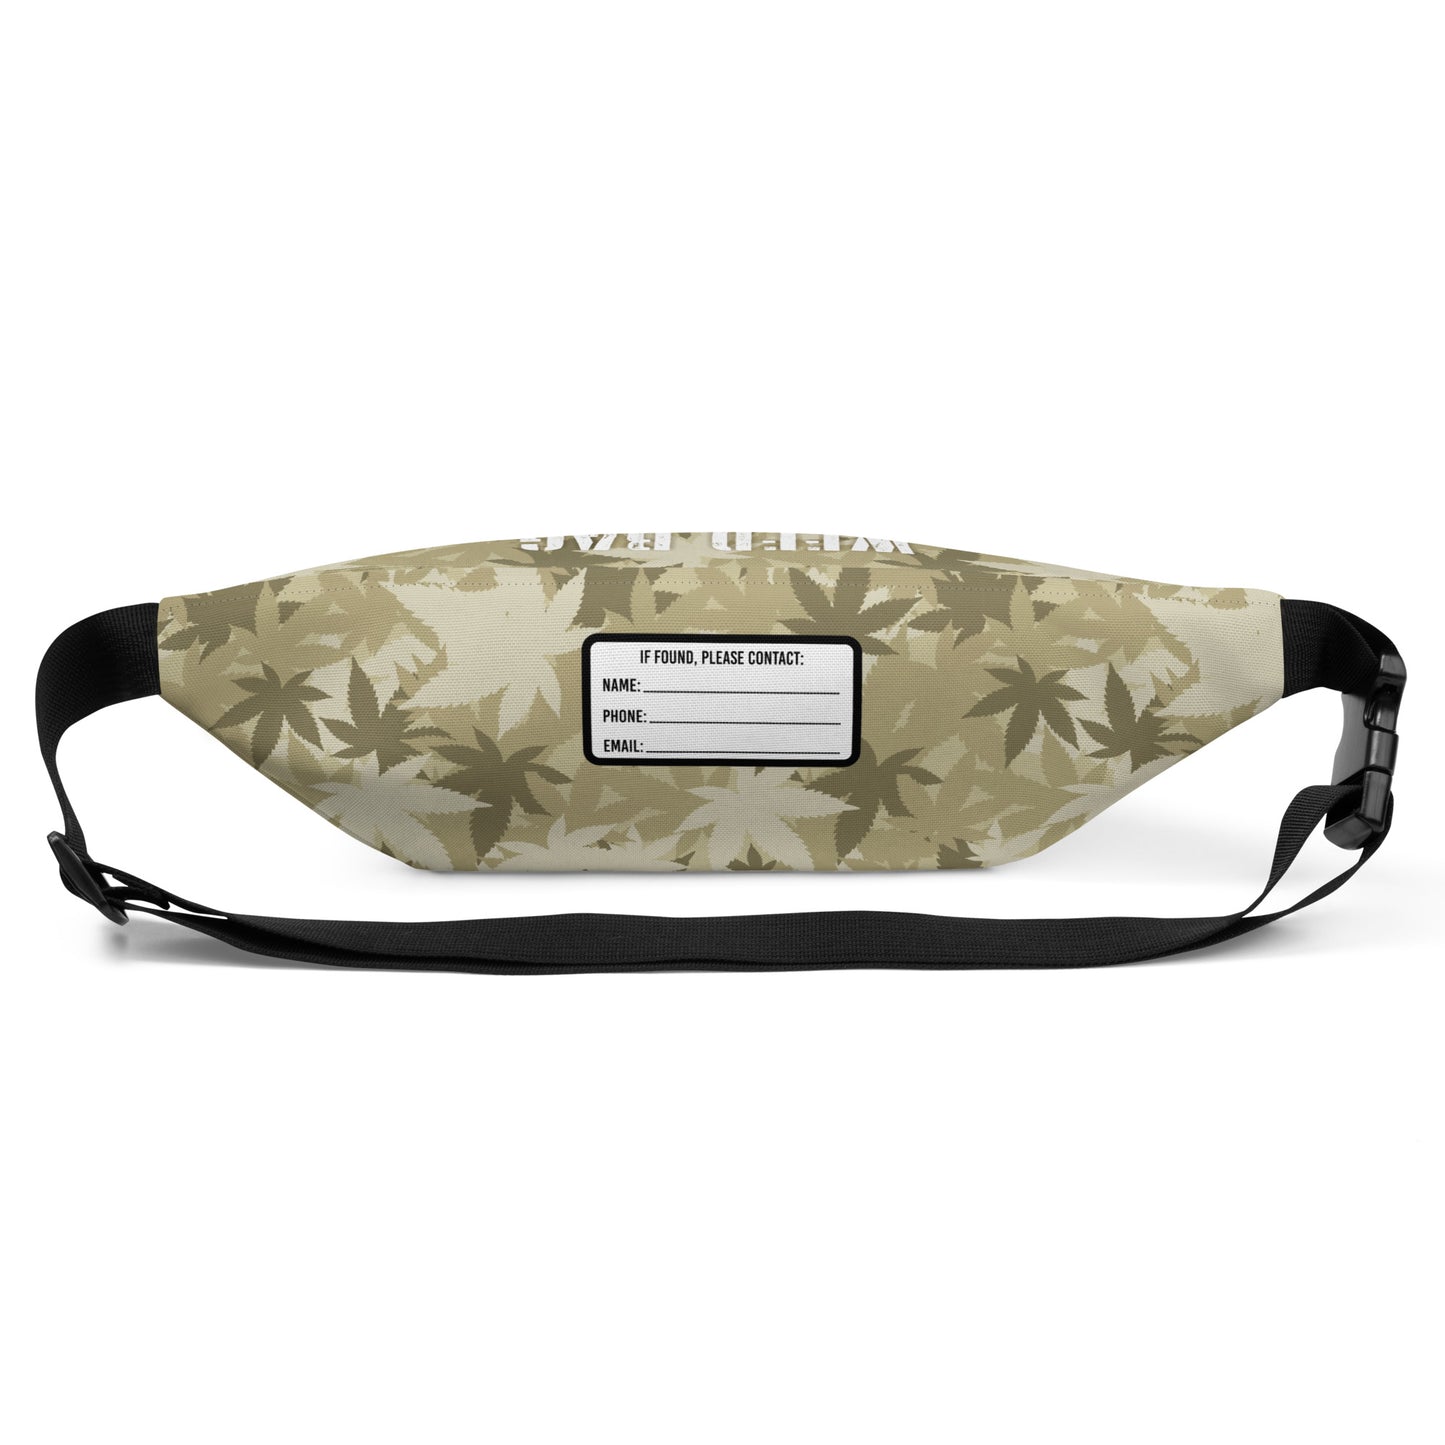 The Weed Bag Fanny Pack